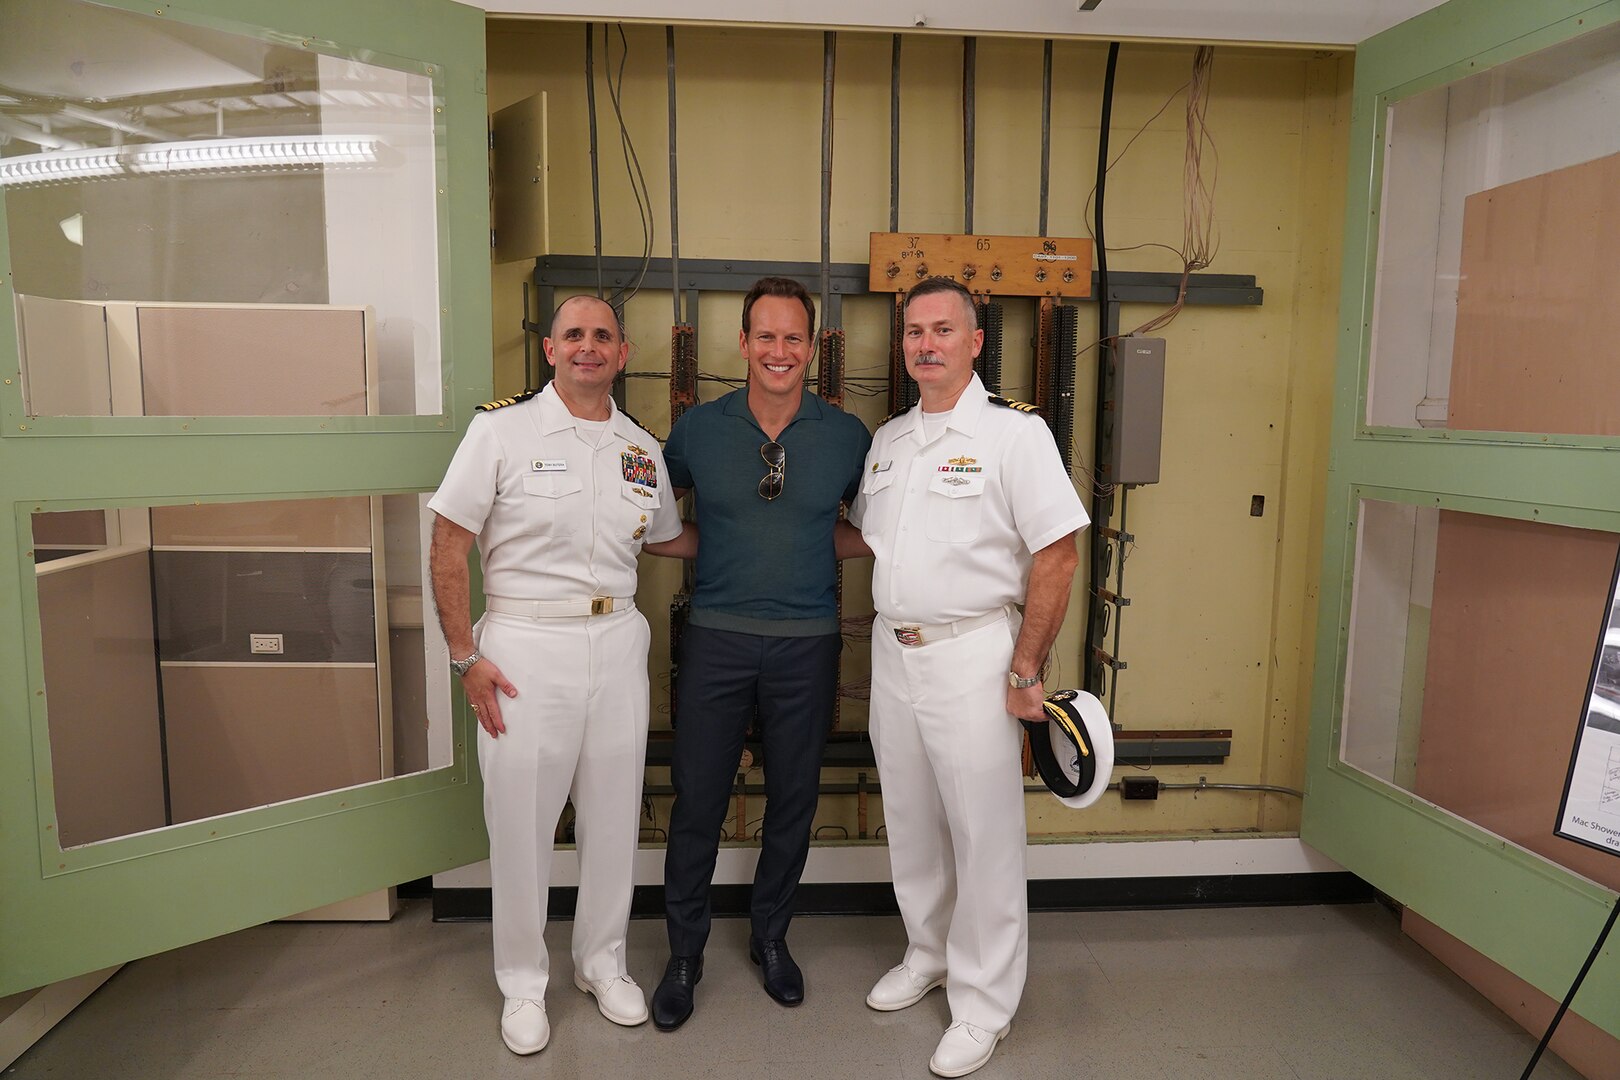 Hollywood actor Patrick Wilson tours Station Hypo with U.S. PACFLT Director of Intelligence and Information Operations Capt. Tony Butera and PHNSY&IMF Executive Officer Cmdr. Scott Shea. Wilson plays Edwin Layton, an intelligence officer who worked at Pearl Harbor –including at Station Hypo– during World War II, in the upcoming movie Midway.